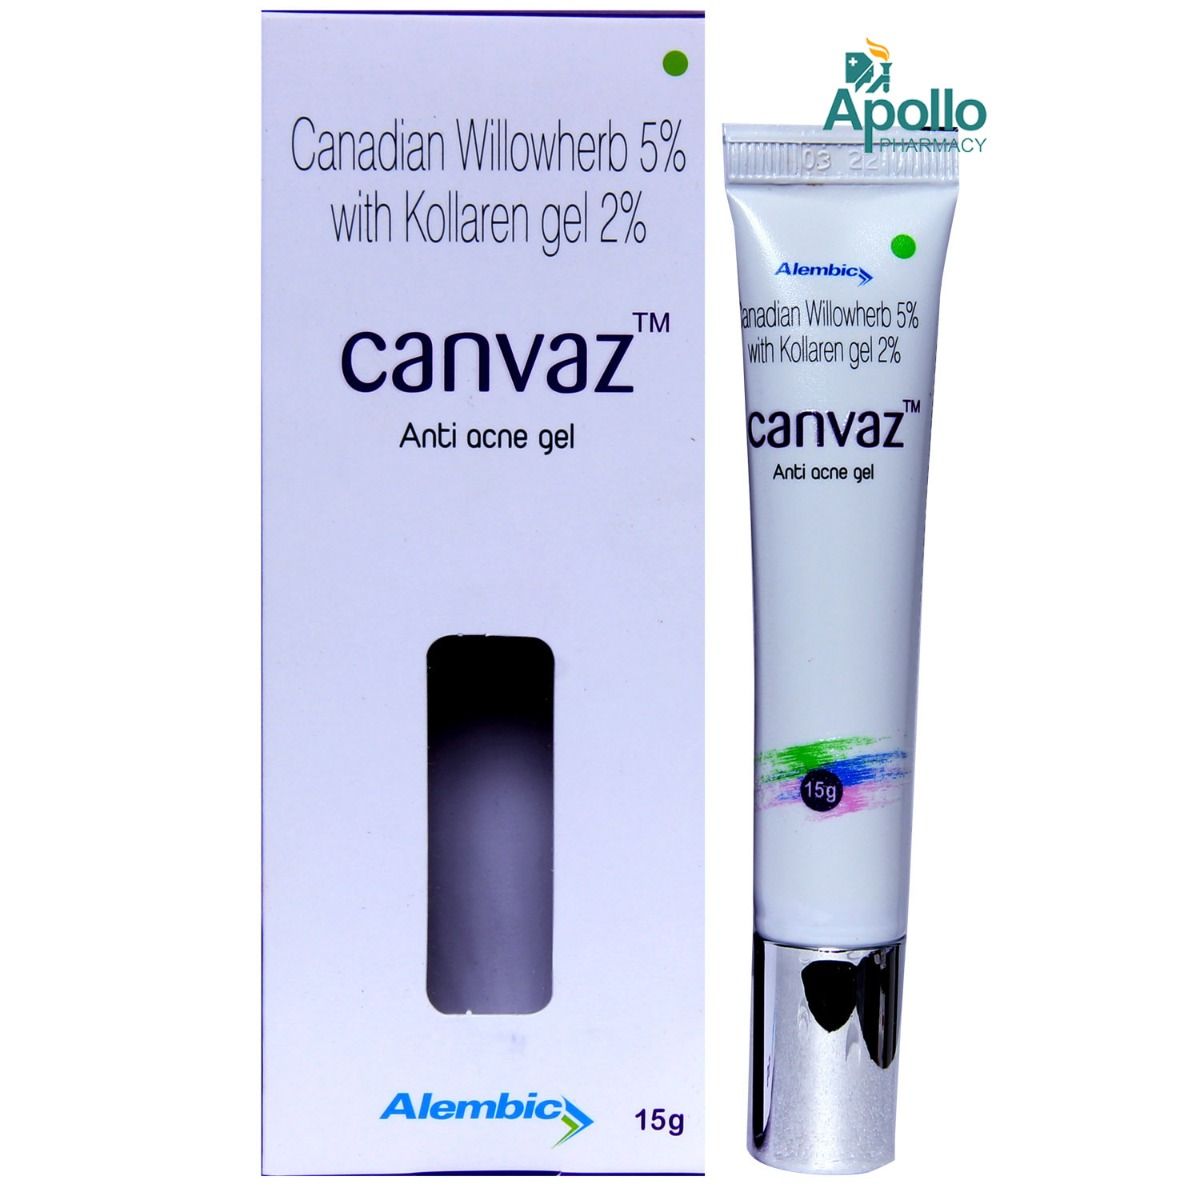 Canvaz Anti Acne Gel 15 gm, Pack of 1 